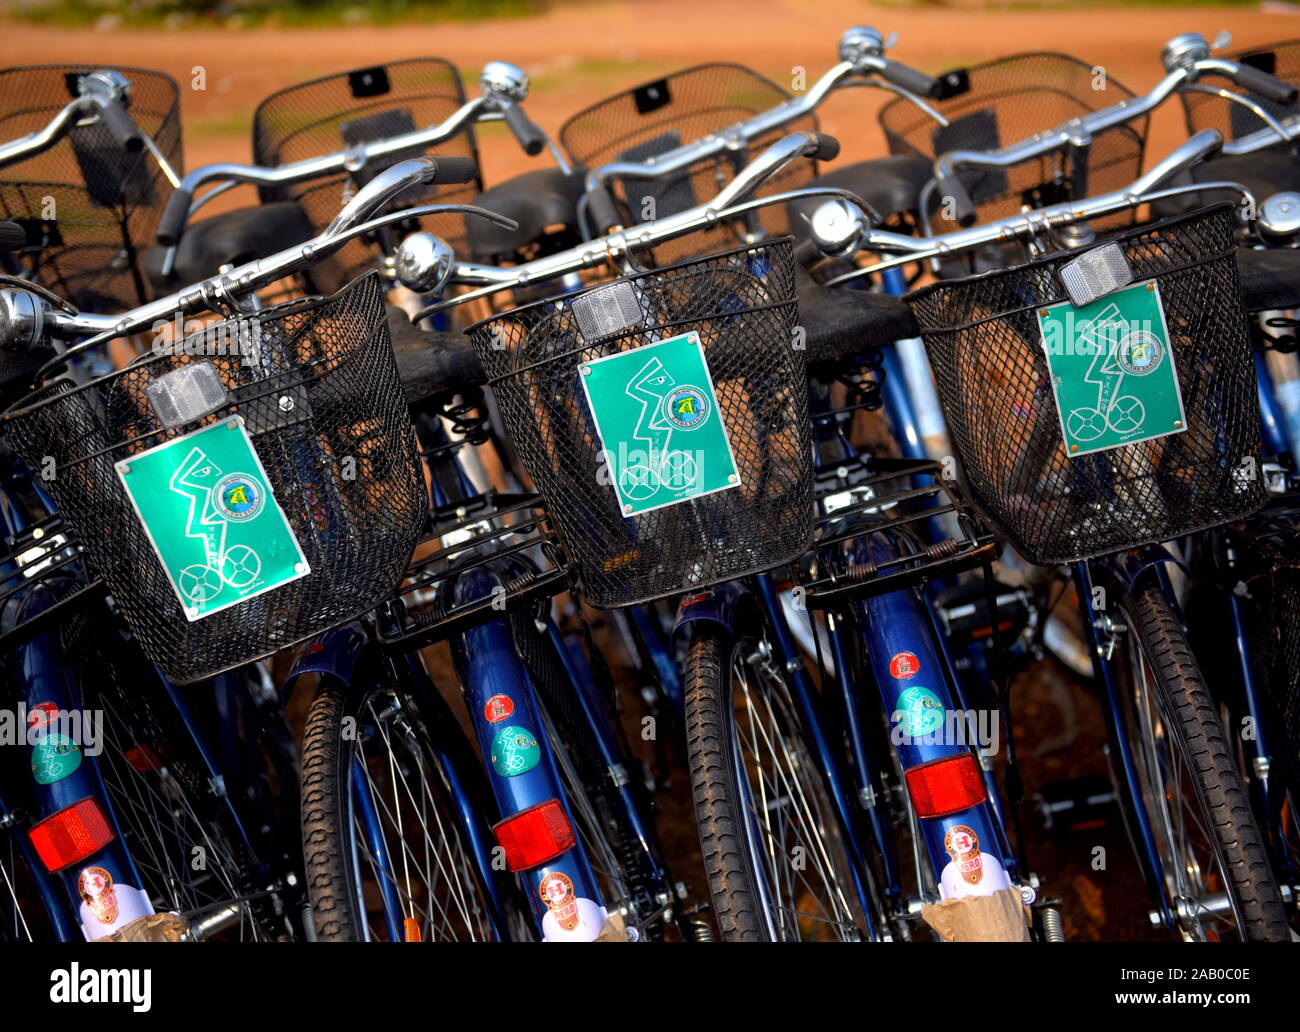 Midnapore, West Bengal, India. 23rd Nov, 2019. Bicycles from the Kanyashree Project at the Block Development Offices of Midnapore ready for distribution among the poor Girl Students.Kanyashree Project is an International recognised project of West Bengal Government by UNICEF. The Project aims at making education easy for the poor Girls who have to cover long distances to school. Credit: Avishek Das/SOPA Images/ZUMA Wire/Alamy Live News Stock Photo